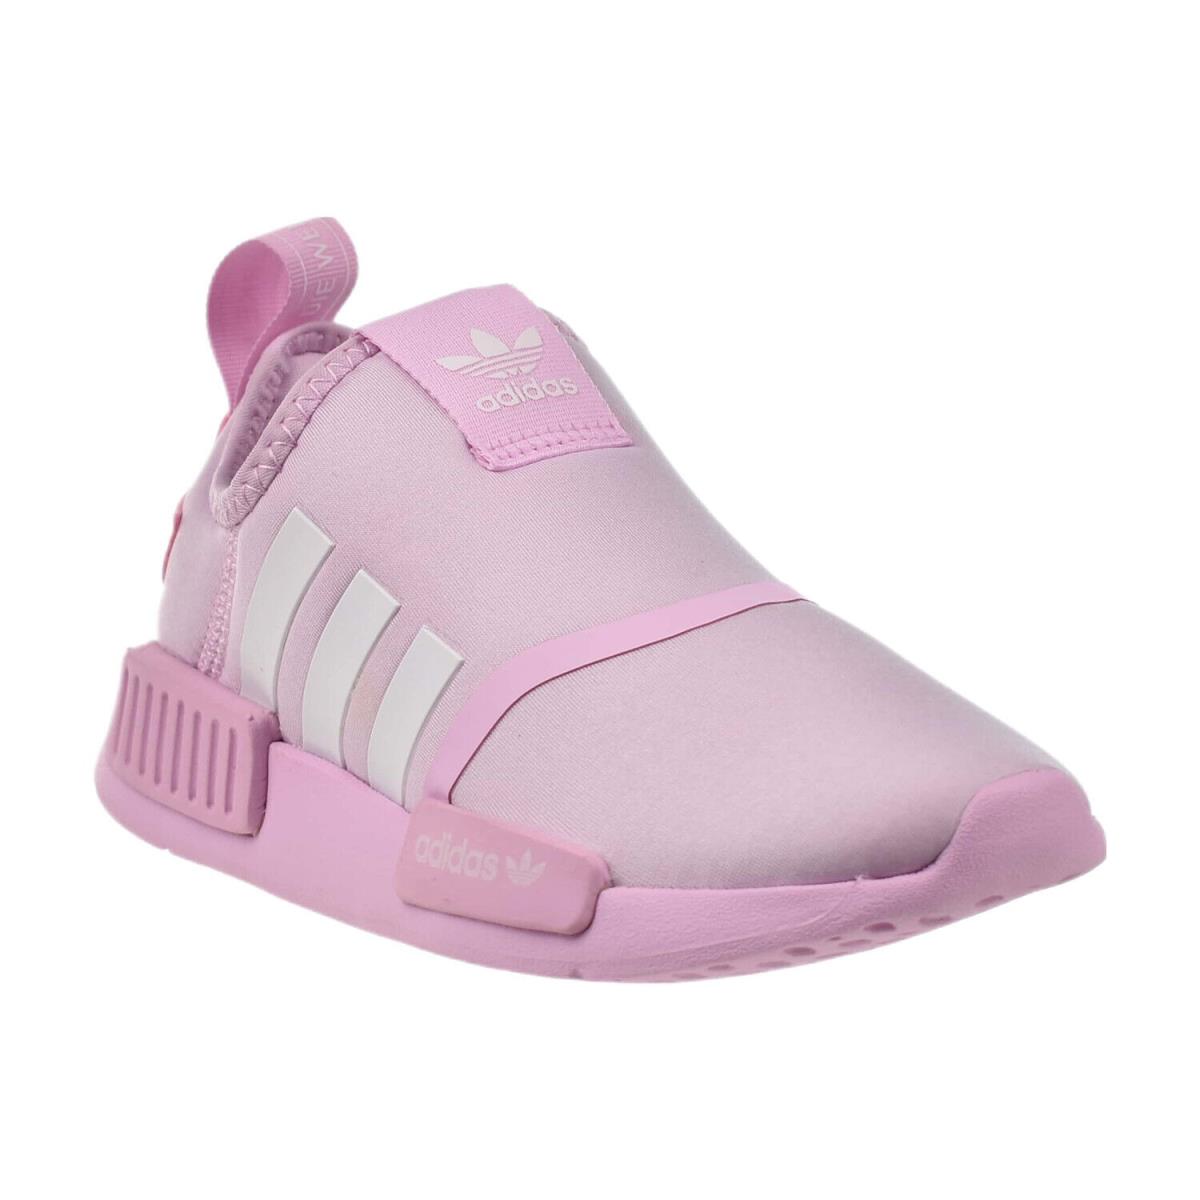 Adidas Nmd 360 C Little Kids` Shoes Orchid Fusion-cloud White IE9685 - Orchid Fusion-Cloud White